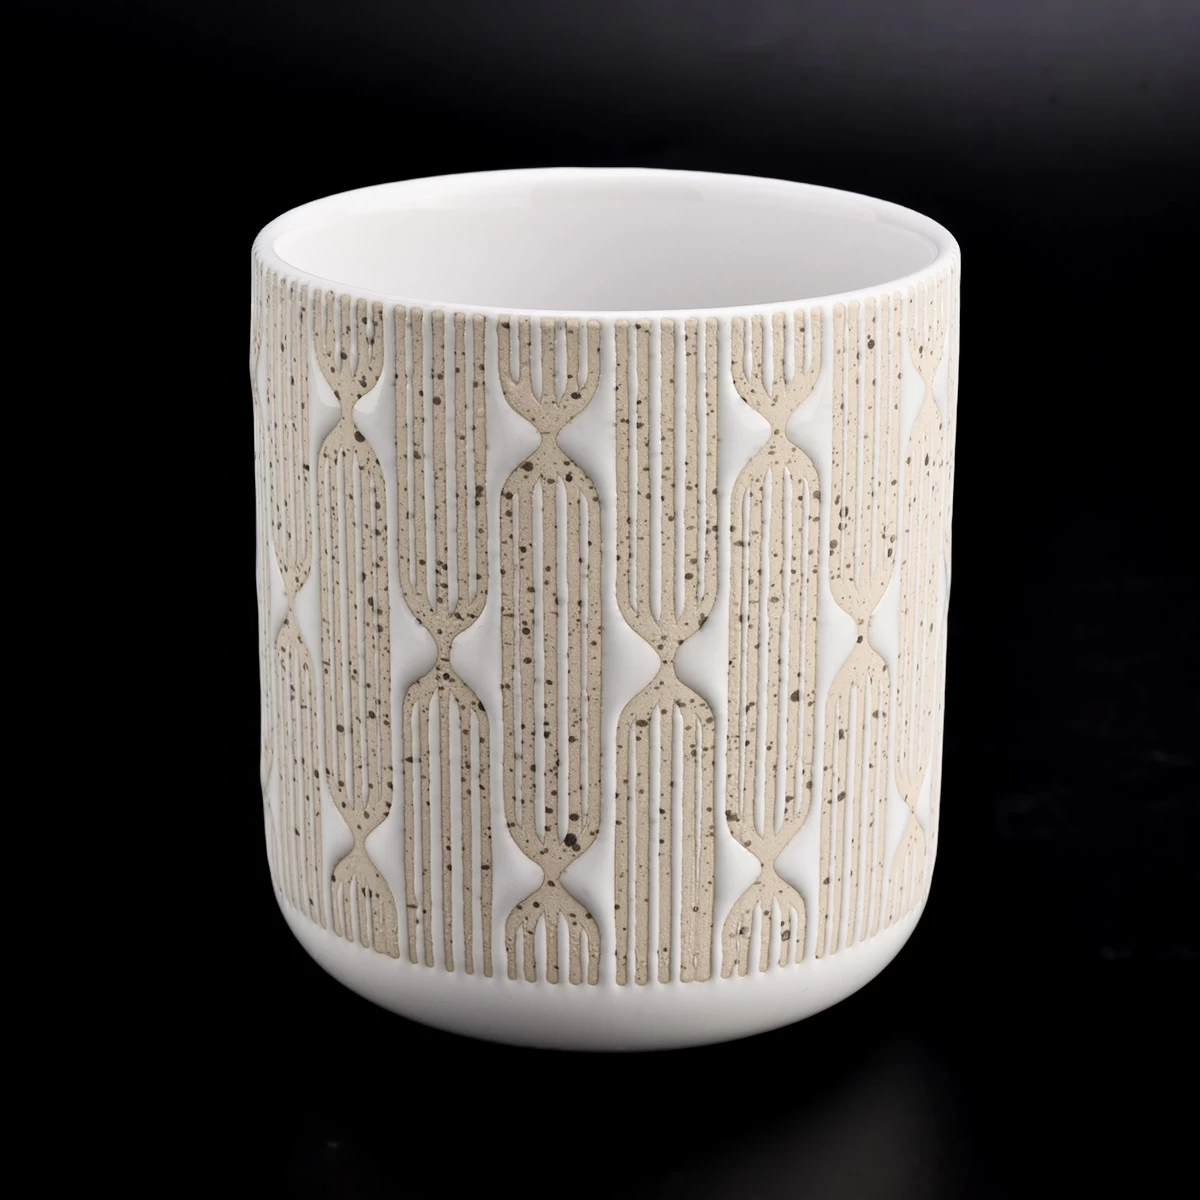 Ceramic candle jar with sand surface pattern